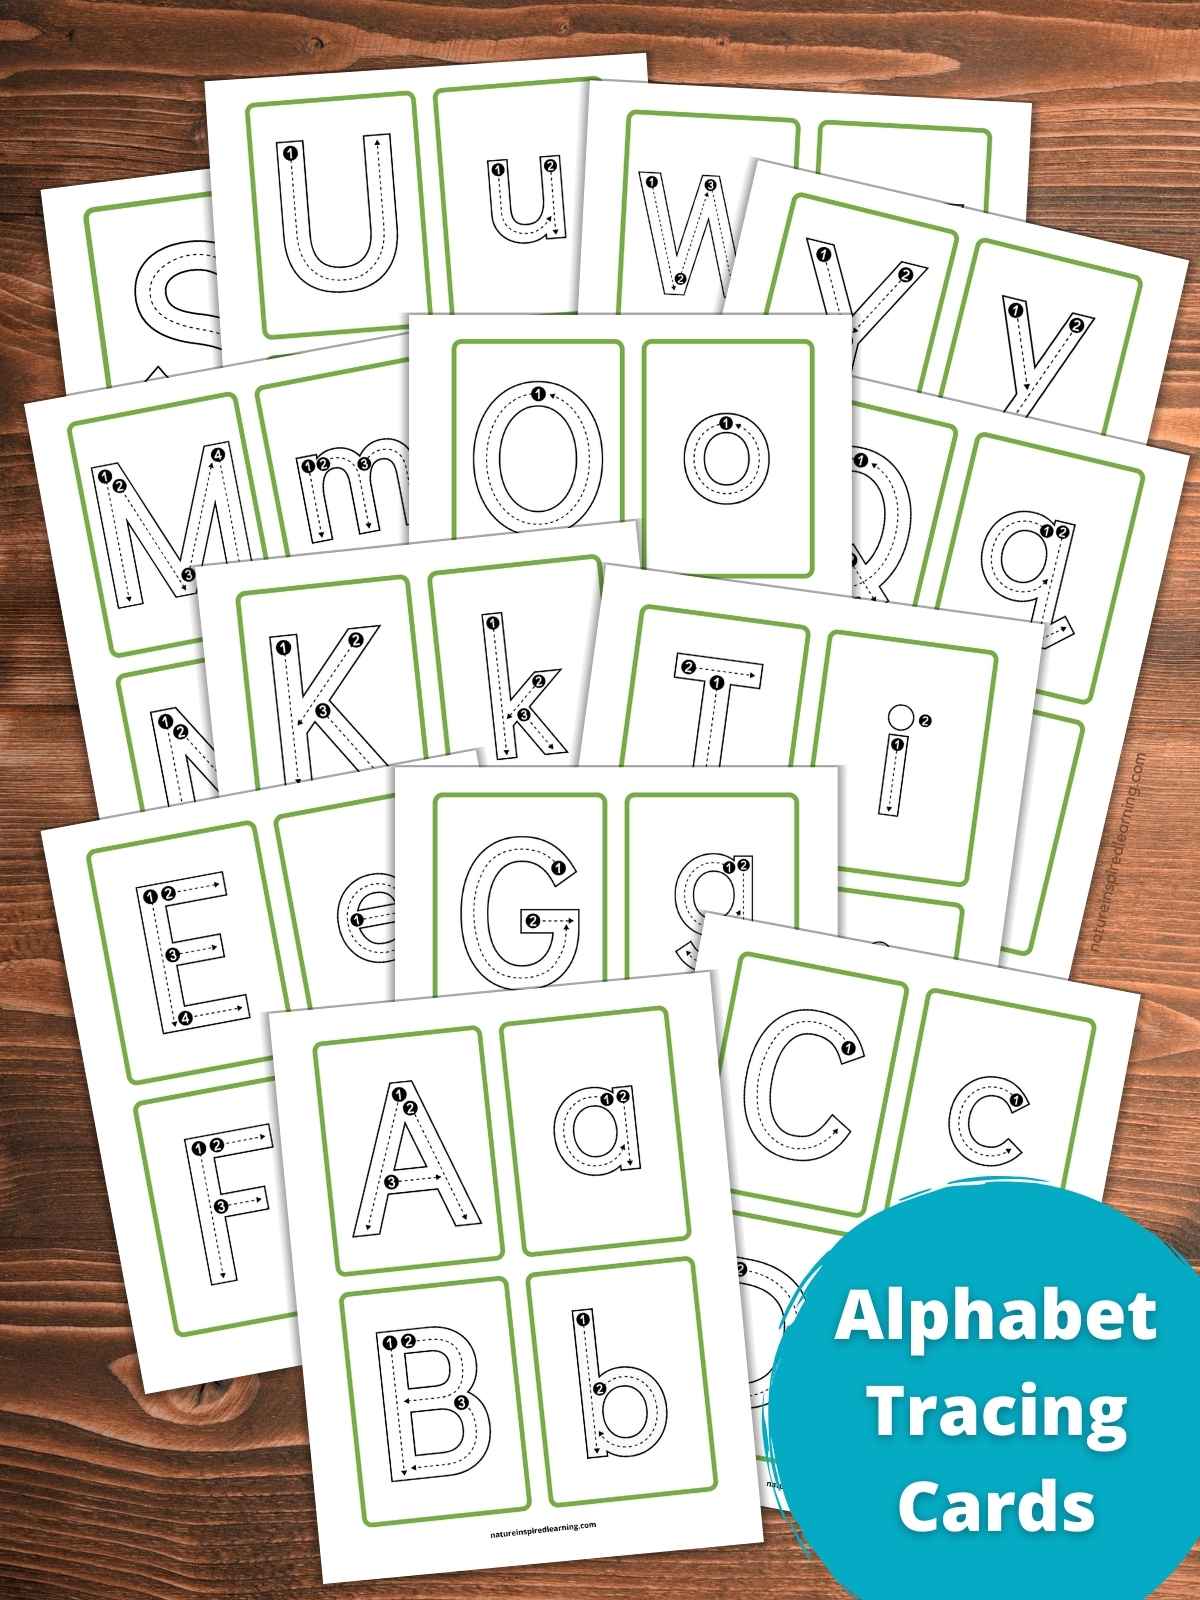 full set of uppercase and lowercase letter tracing cards with letters a through z. Each letter has dashed guidelines and numbers within the outline of the letter. Cards have a white background with a simple green outline. Set of printables overlapping on a wooden background with a blue circle bottom right with text overlay.